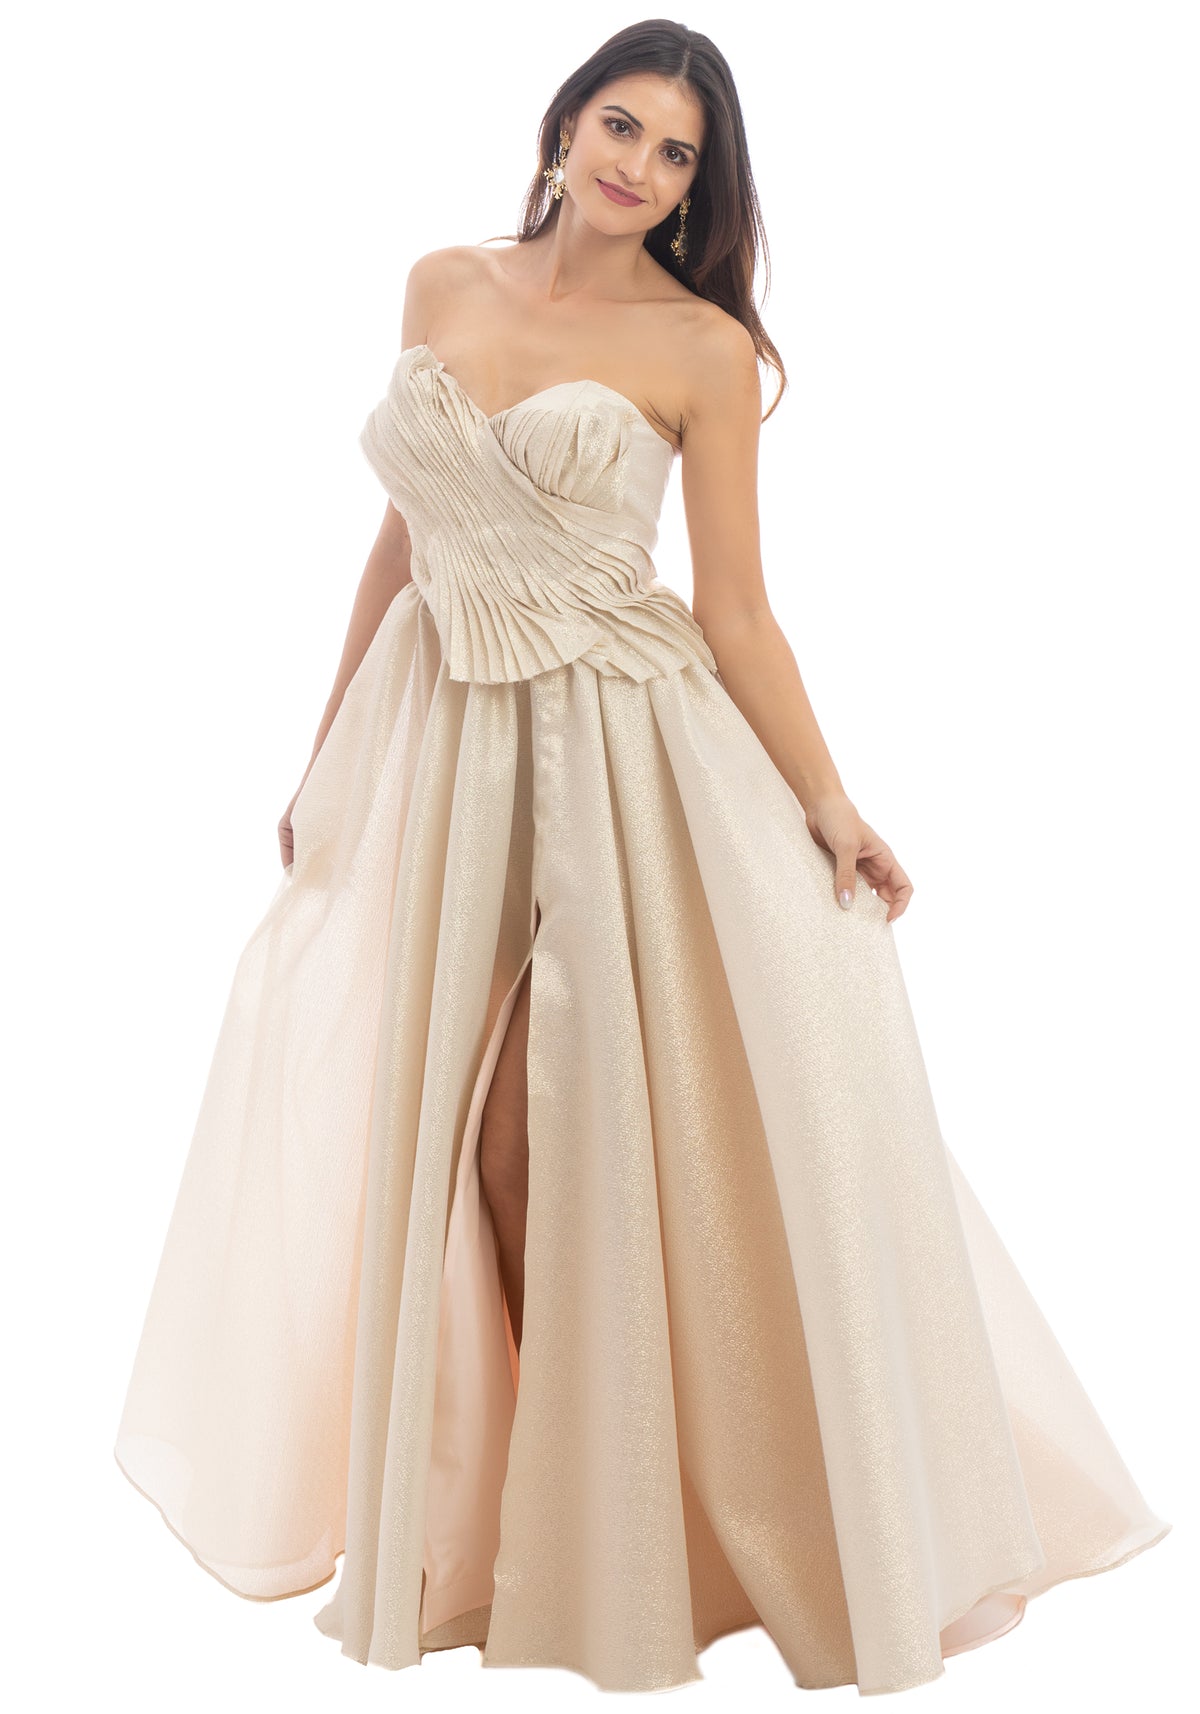 Exclusive Strapless Bustier Gown